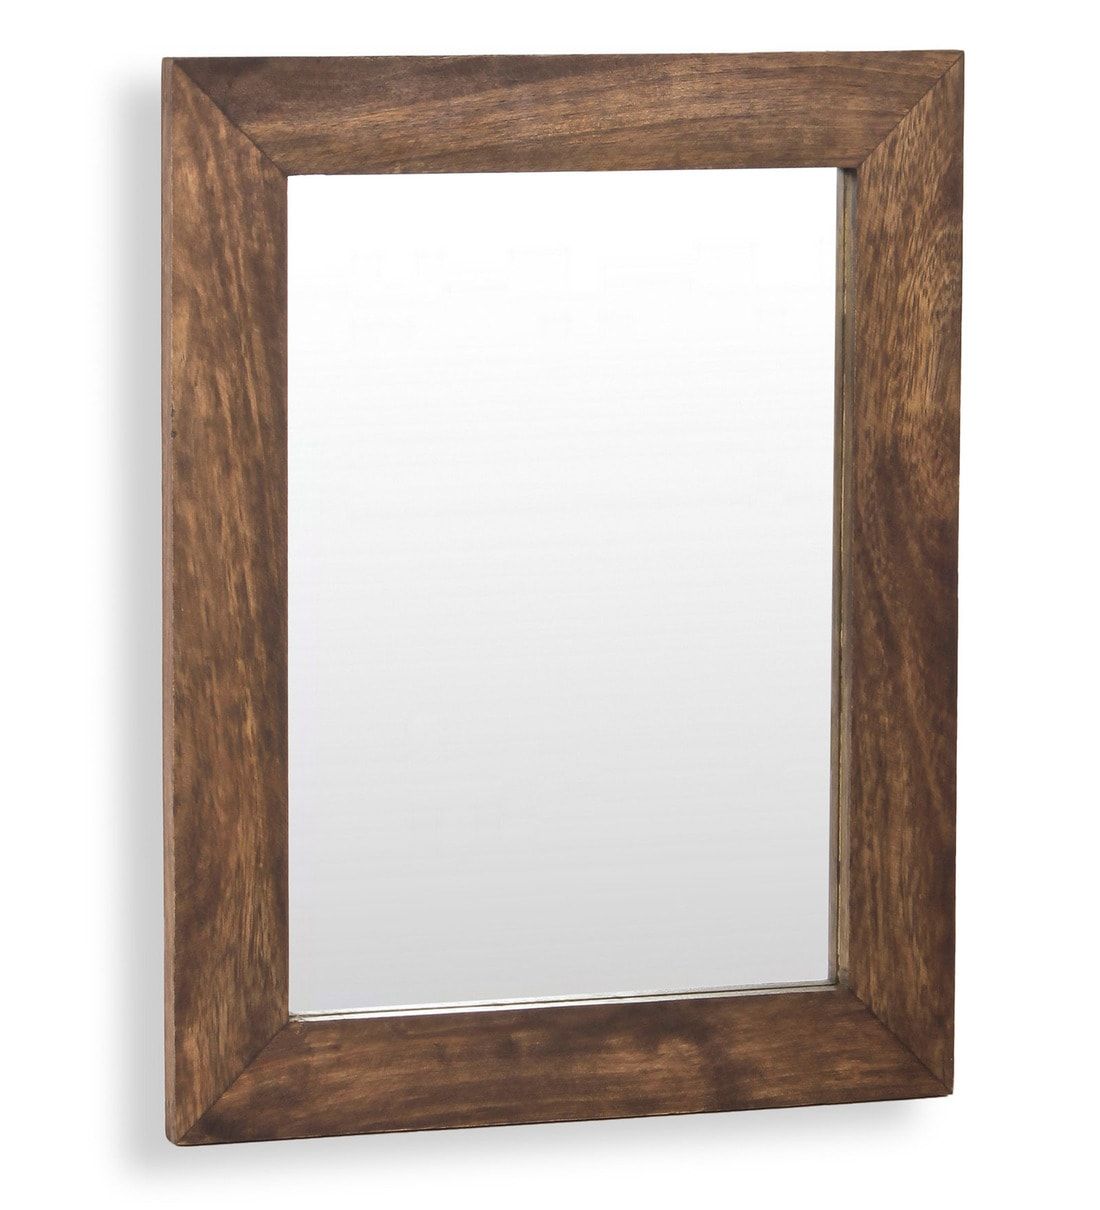 Buy Mango Wood Rectangle Wall Mirror In Walnut Colourfabuliv Online Intended For Walnut Wood Wall Mirrors (View 2 of 15)